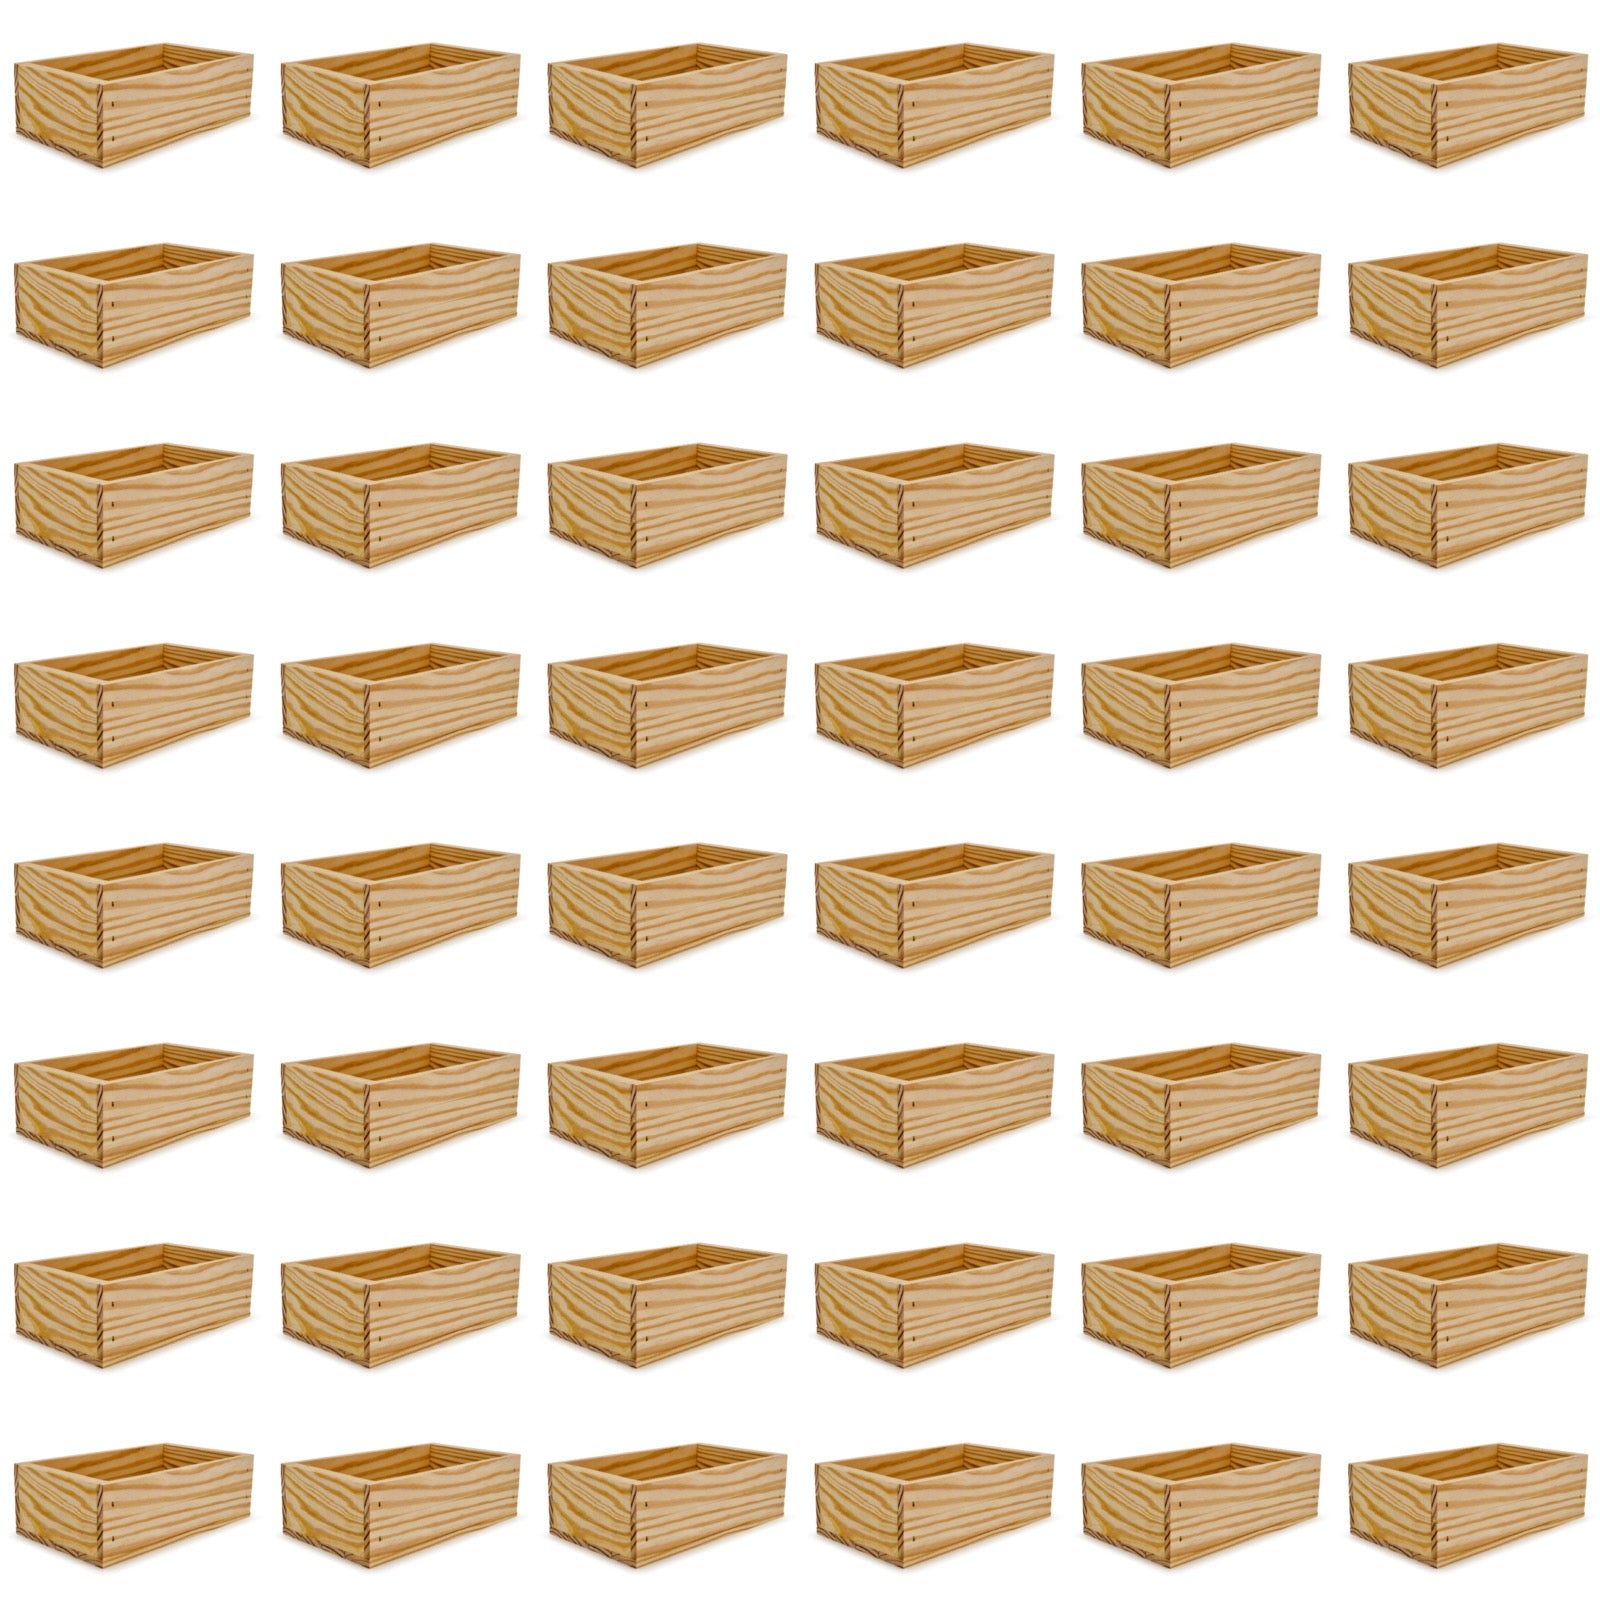 48 Small wooden crates 11x6.25x3.5